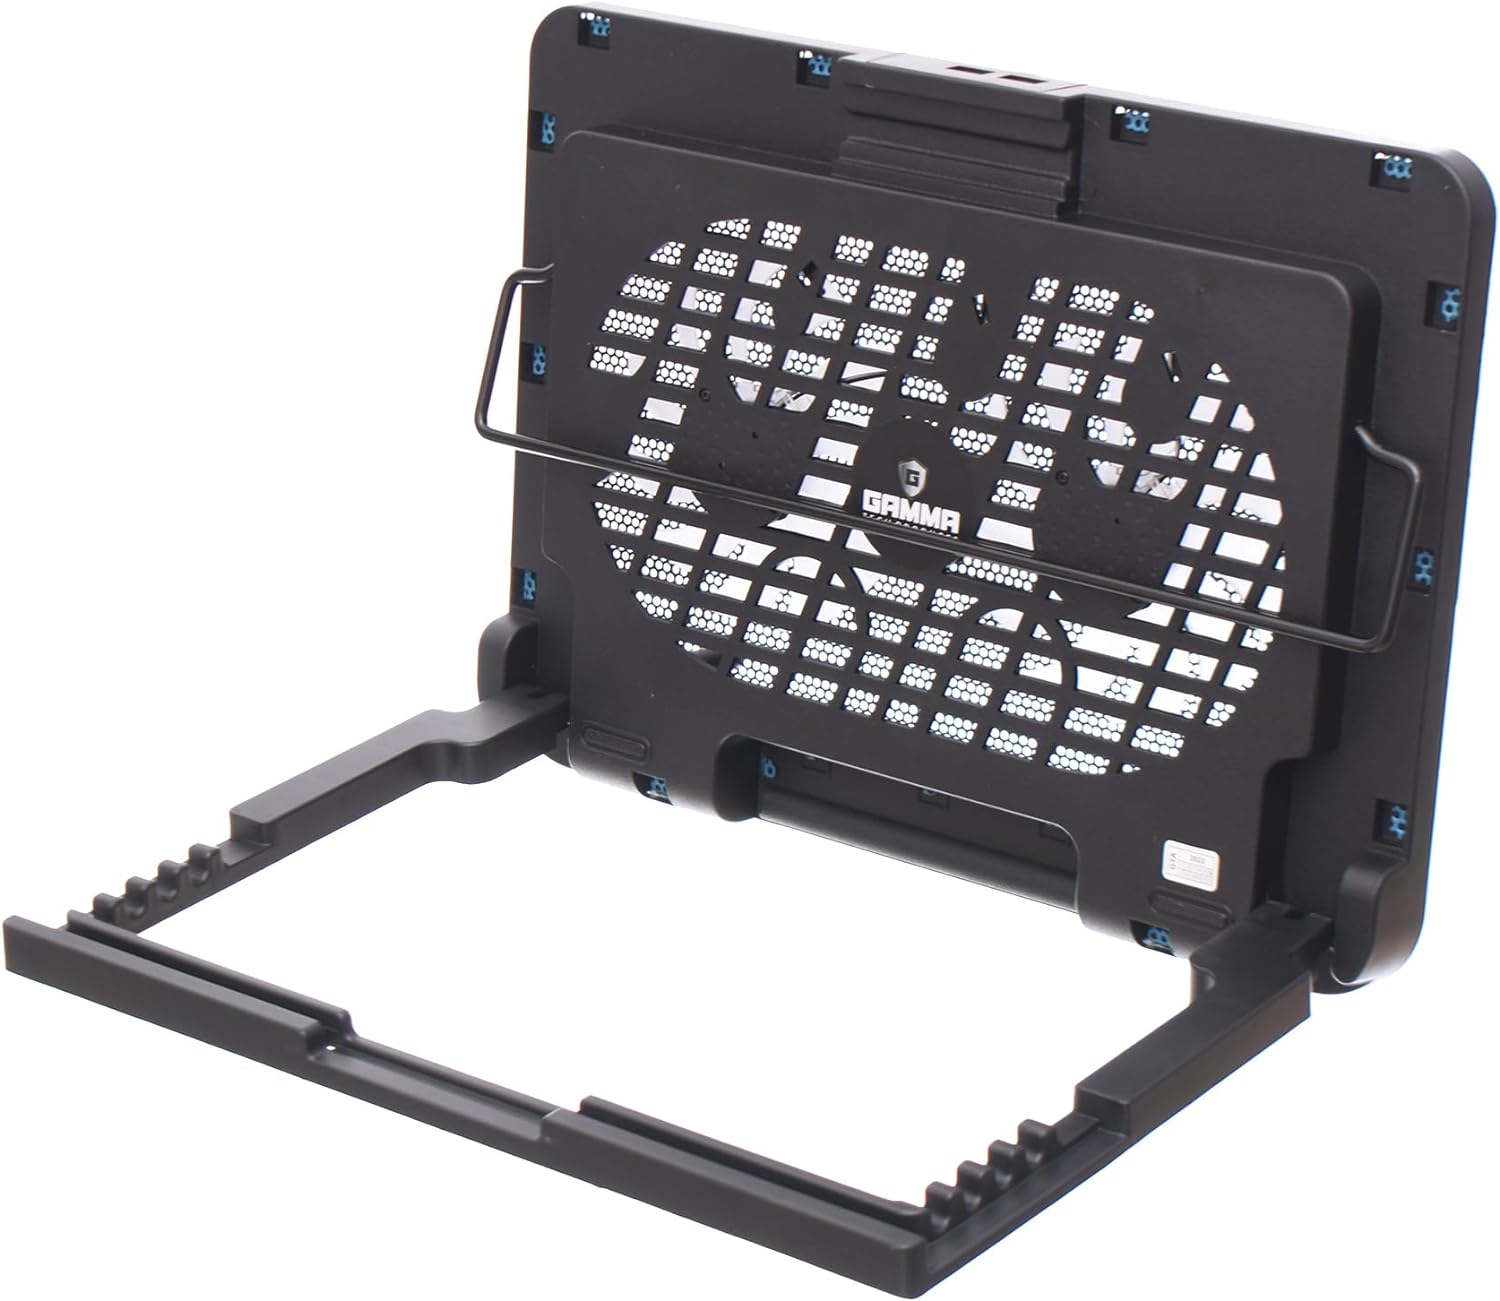 Gamma GT-99 Cooling Pad Containing Six Angle Stand With Two USB Ports And Fan Control button For Laptop 360x260x30mm